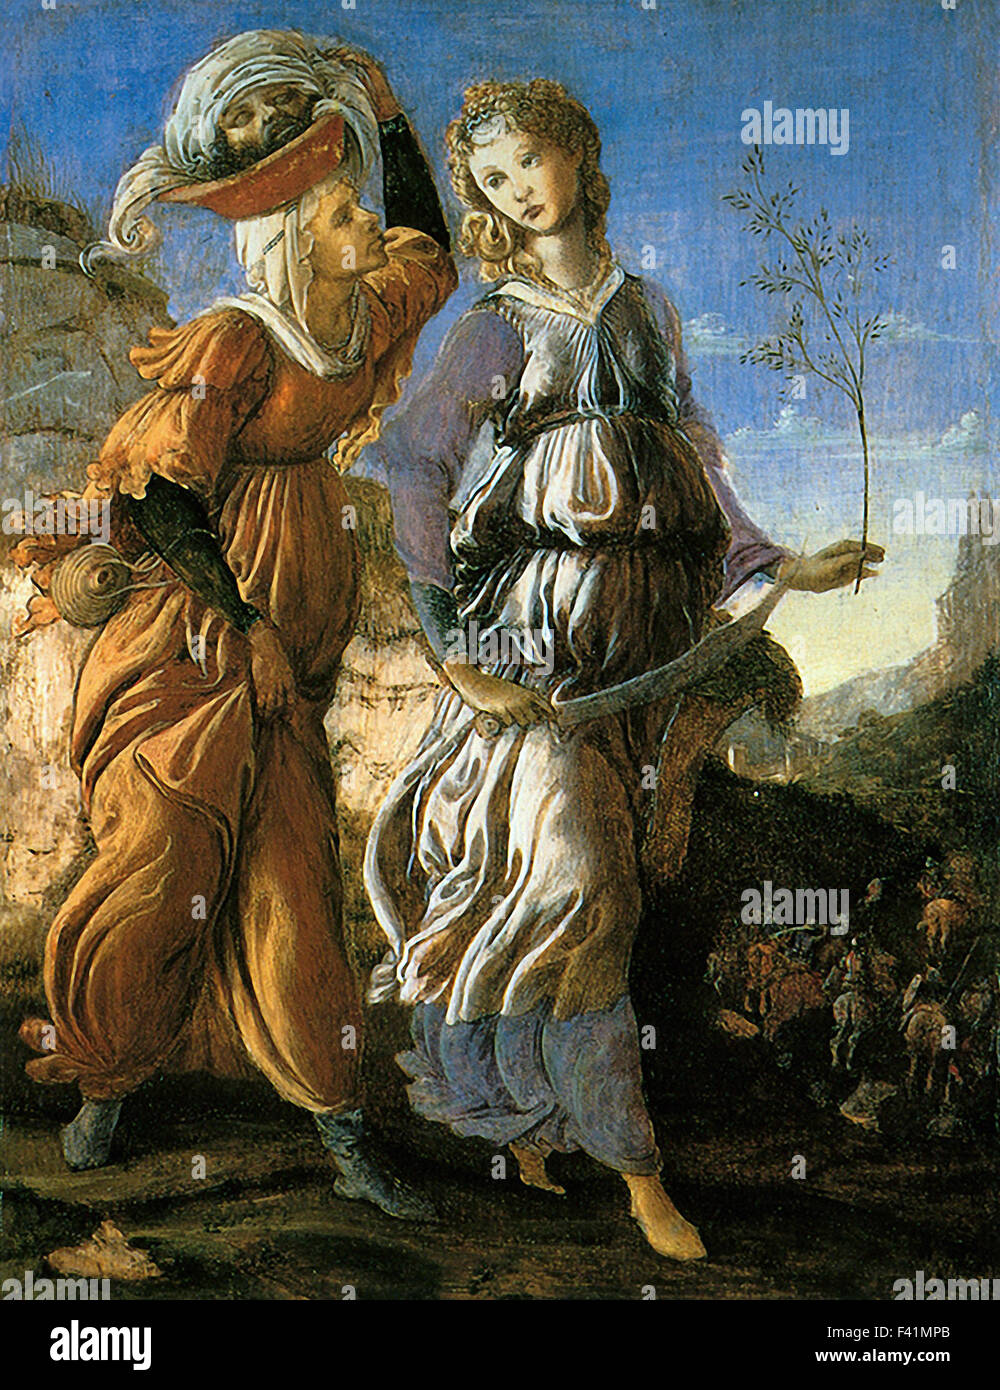 Sandro Botticelli - Judith with the Head of Holofernes b Stock Photo